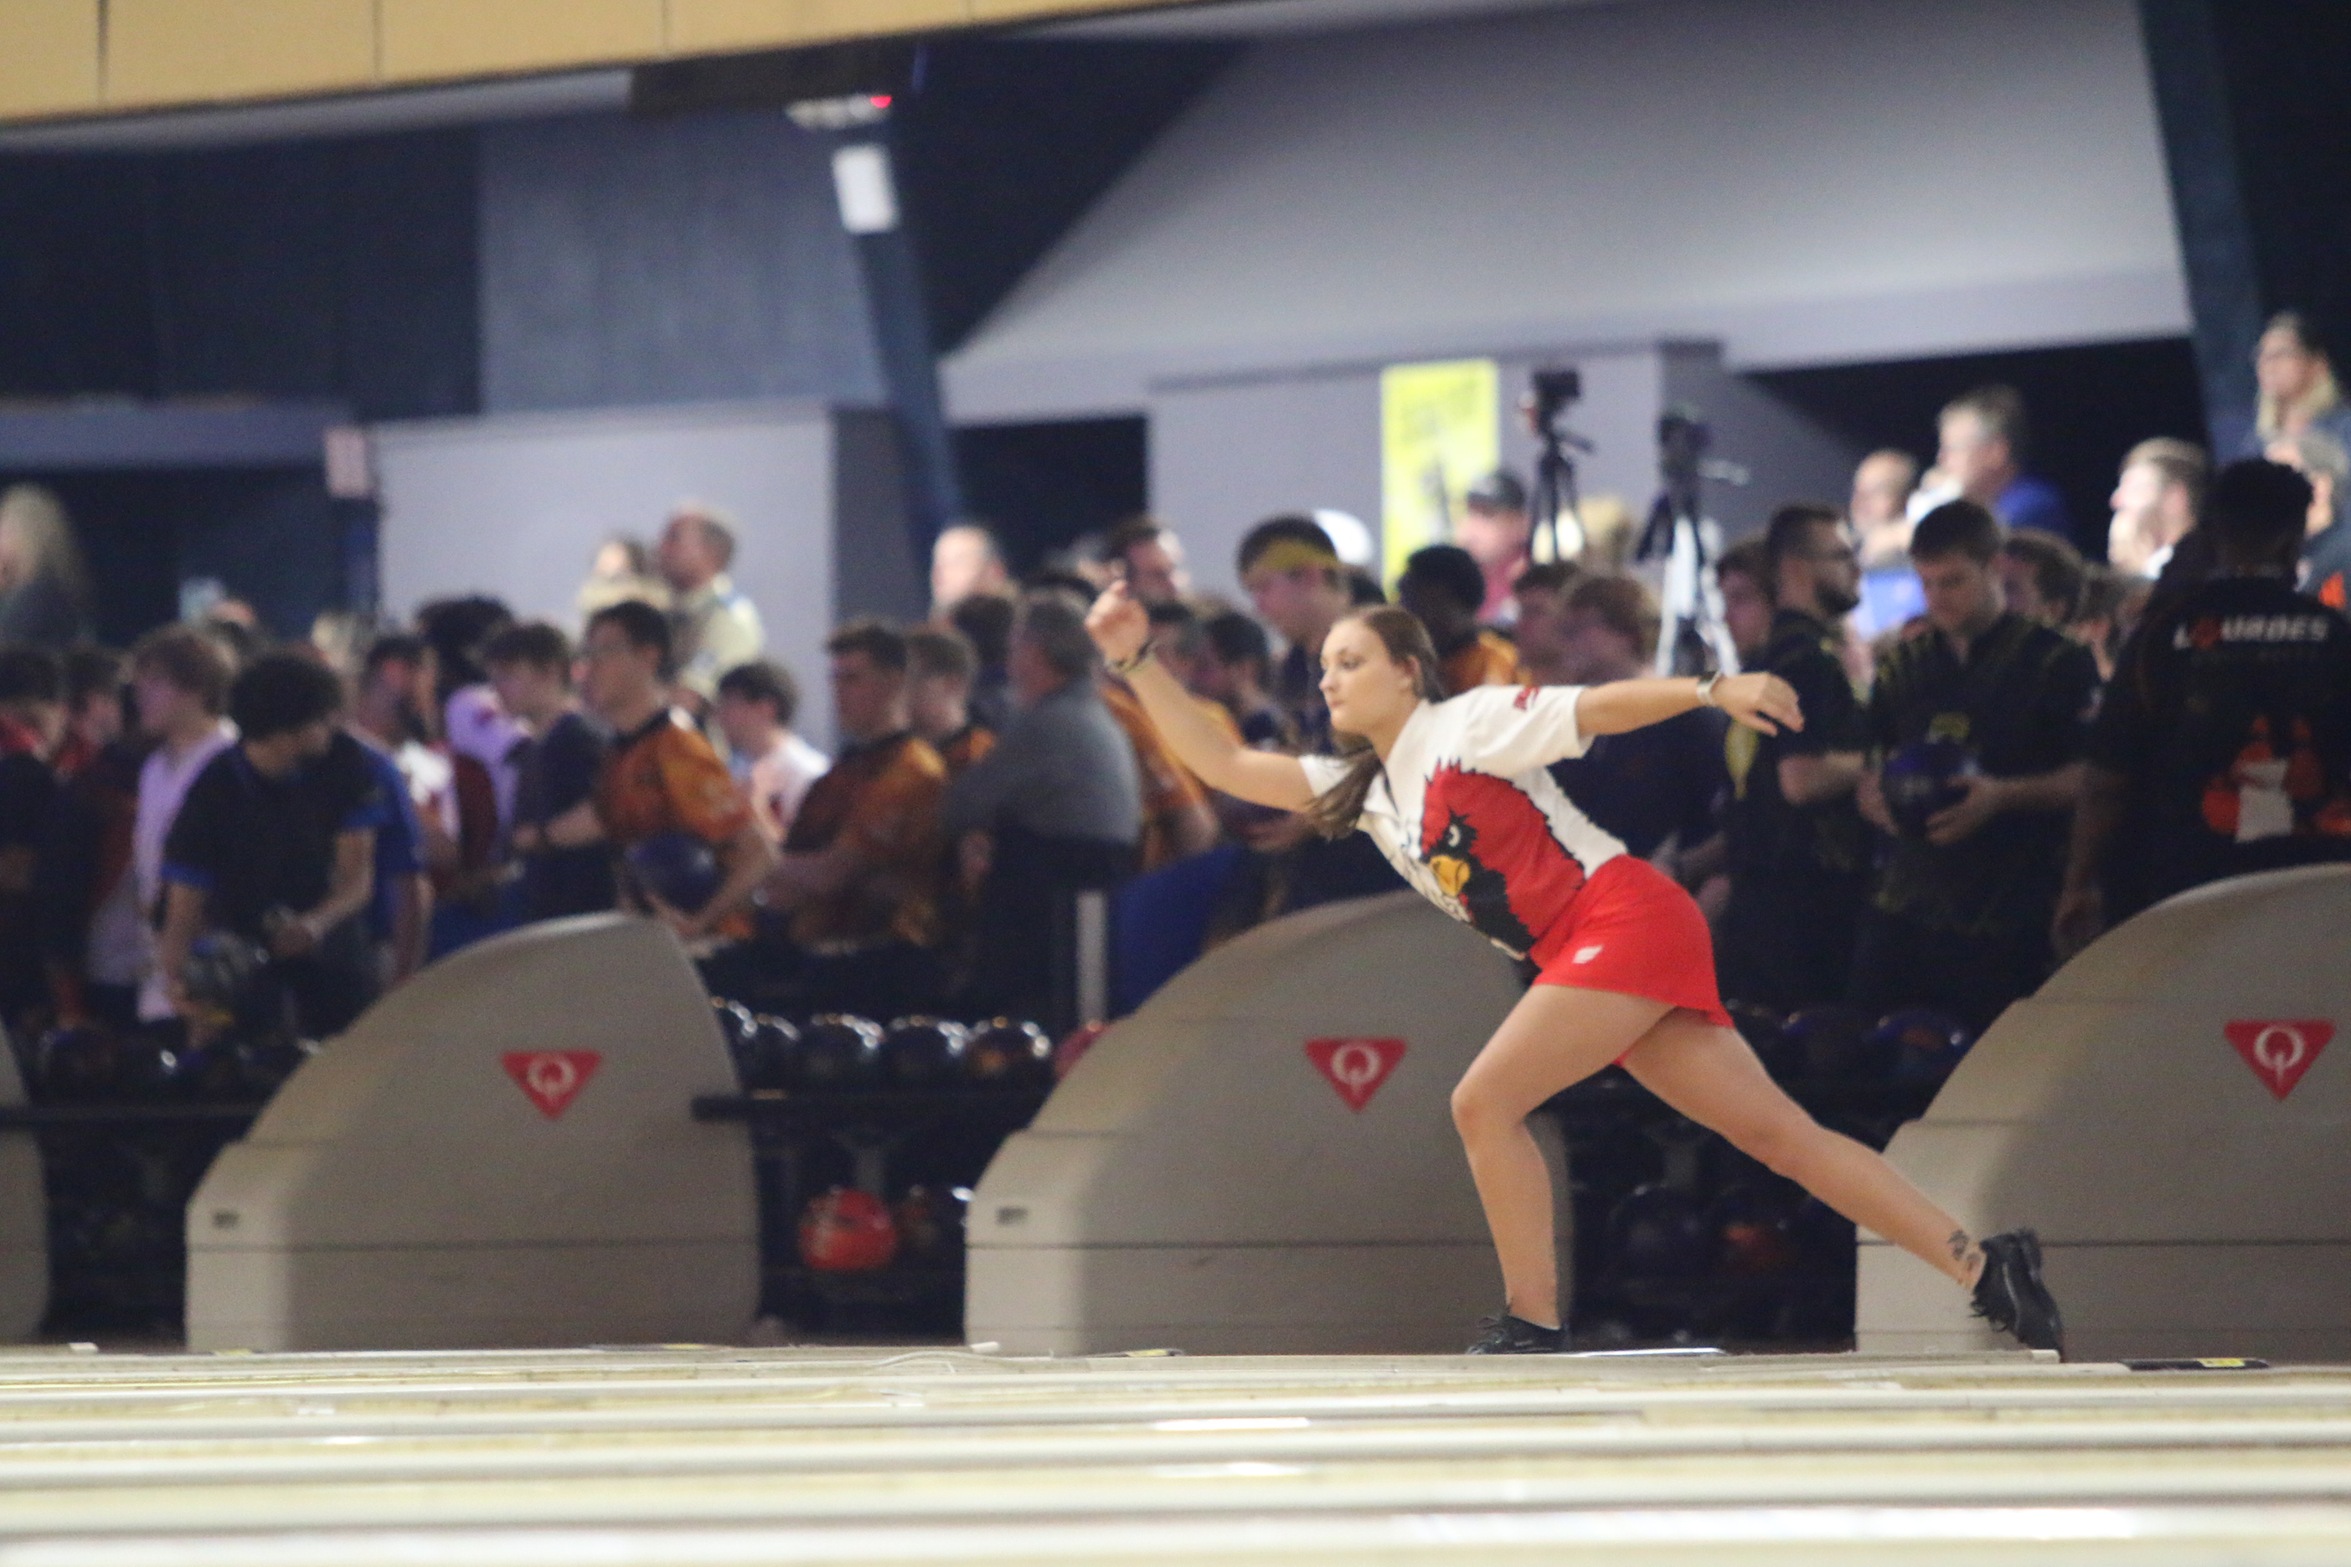 Women's Bowling compete at Collegiate Shoot Out